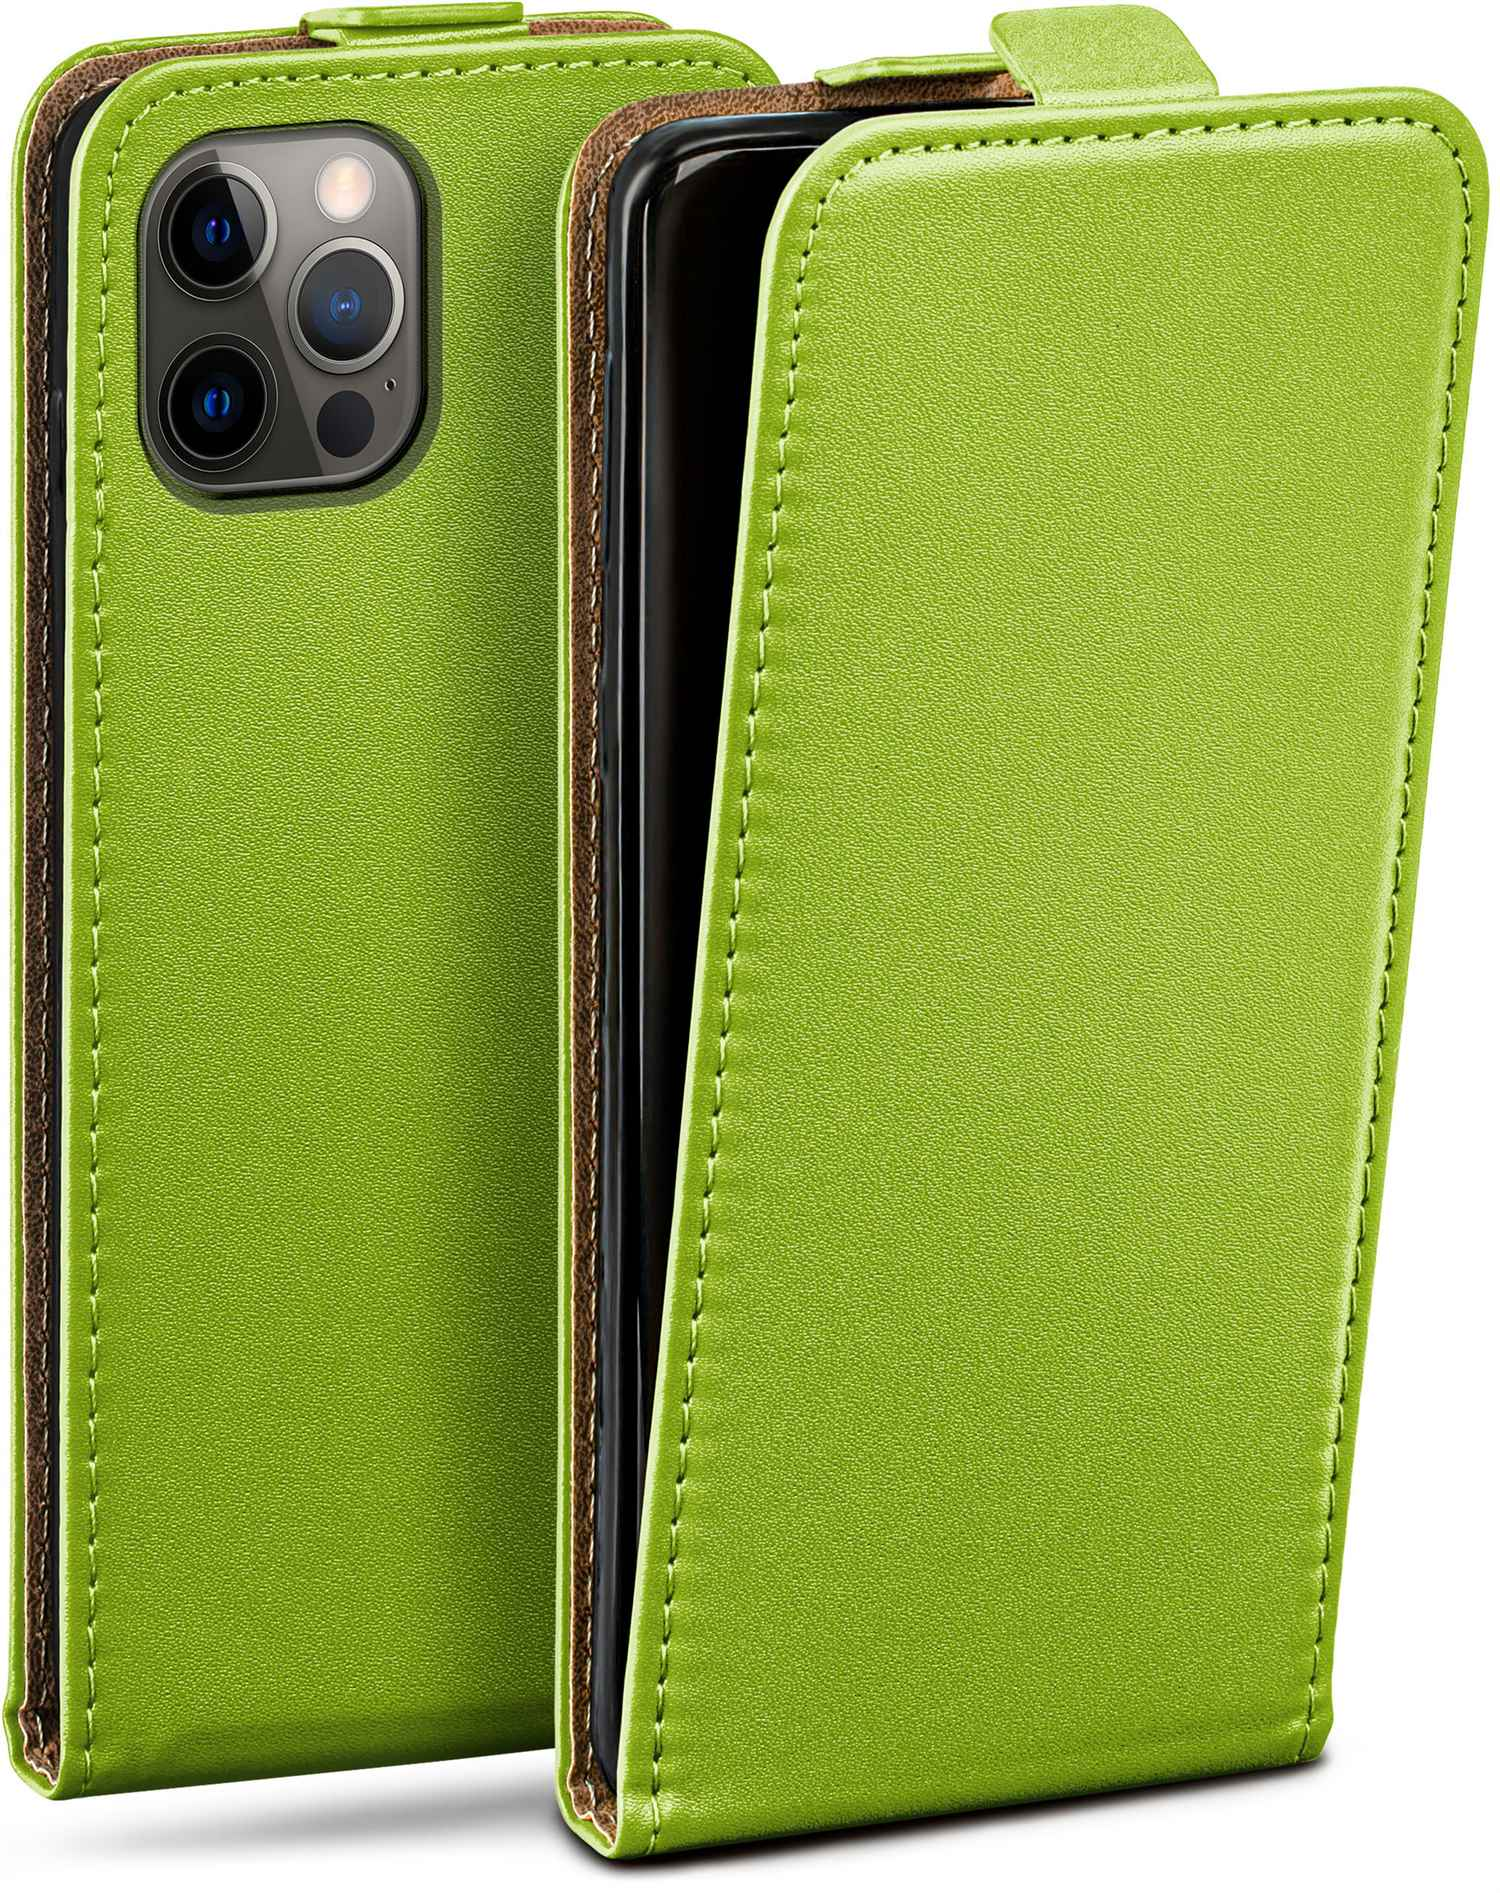 MOEX Flip Max, Case, Cover, Lime-Green Pro Apple, iPhone 12 Flip